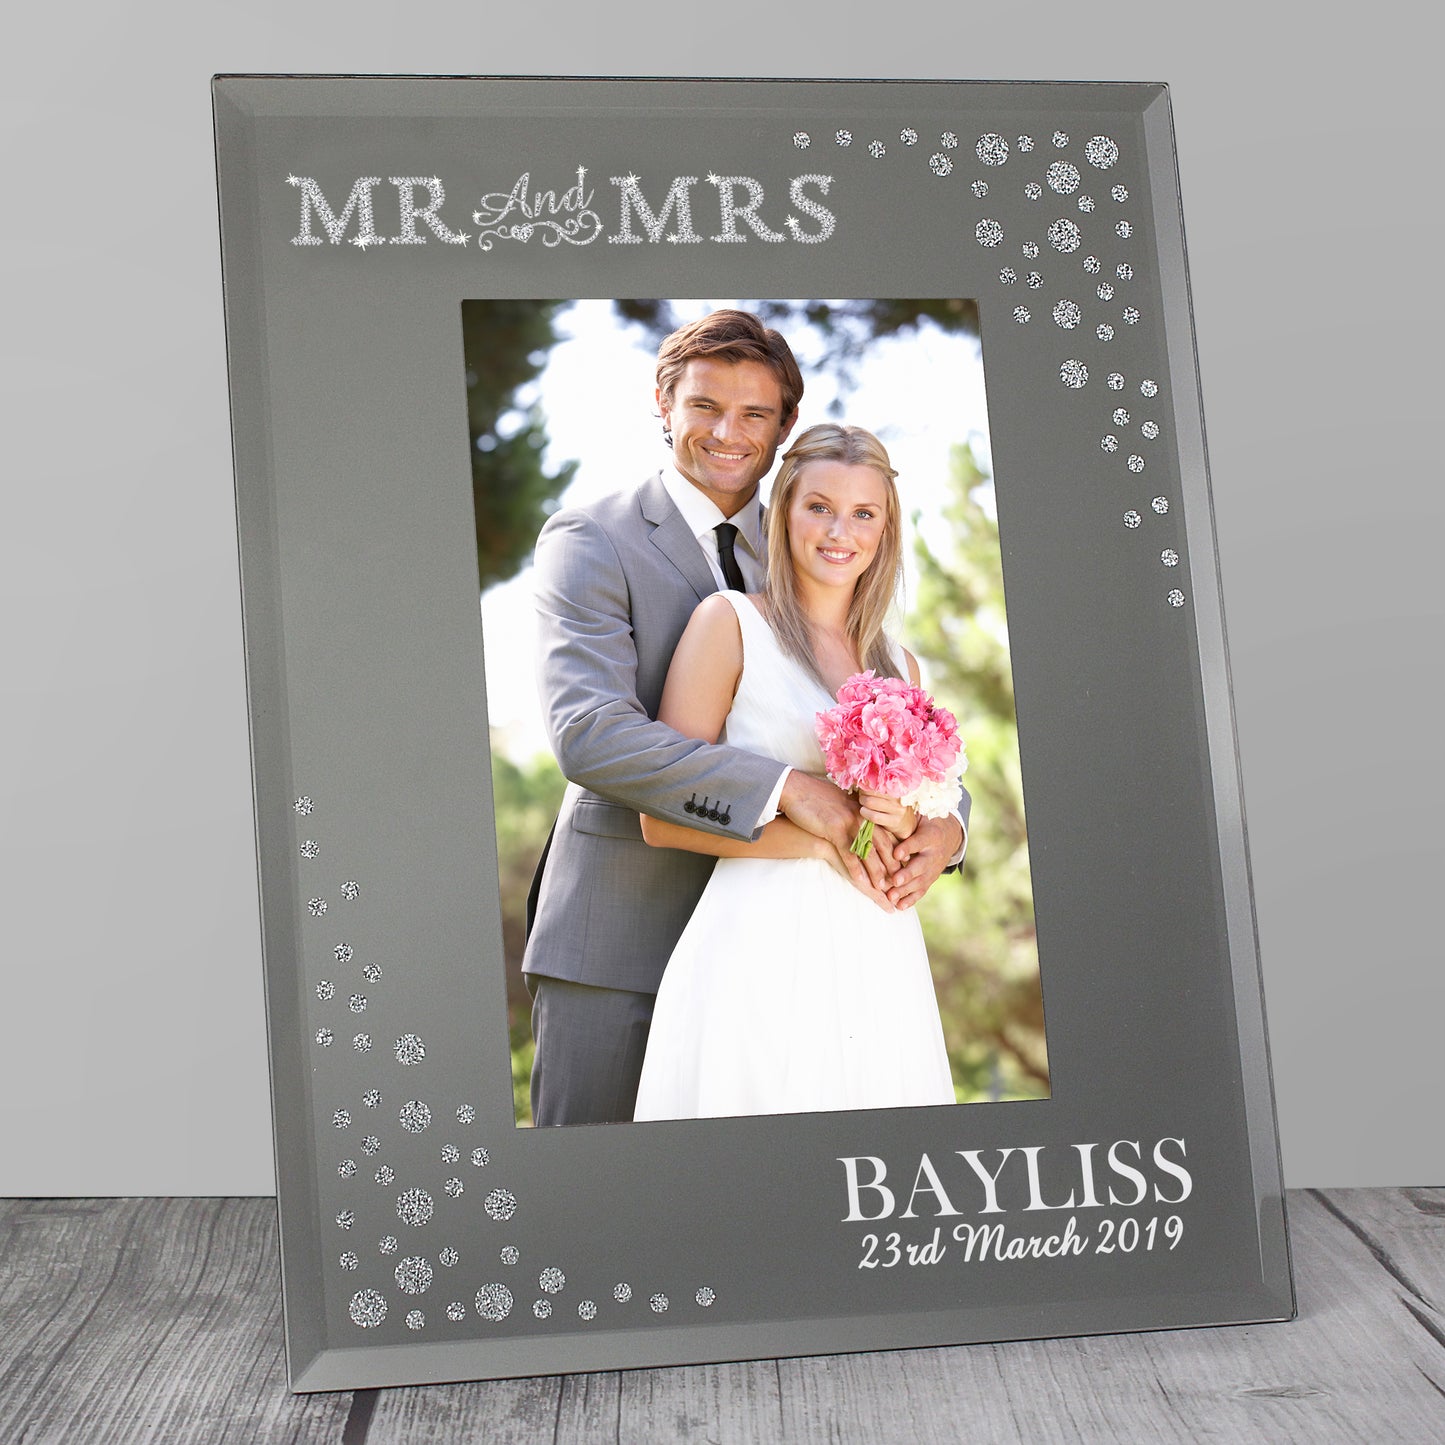 Personalised Mr and Mrs 4x6 Diamante Glass Photo Frame - Personalise It!